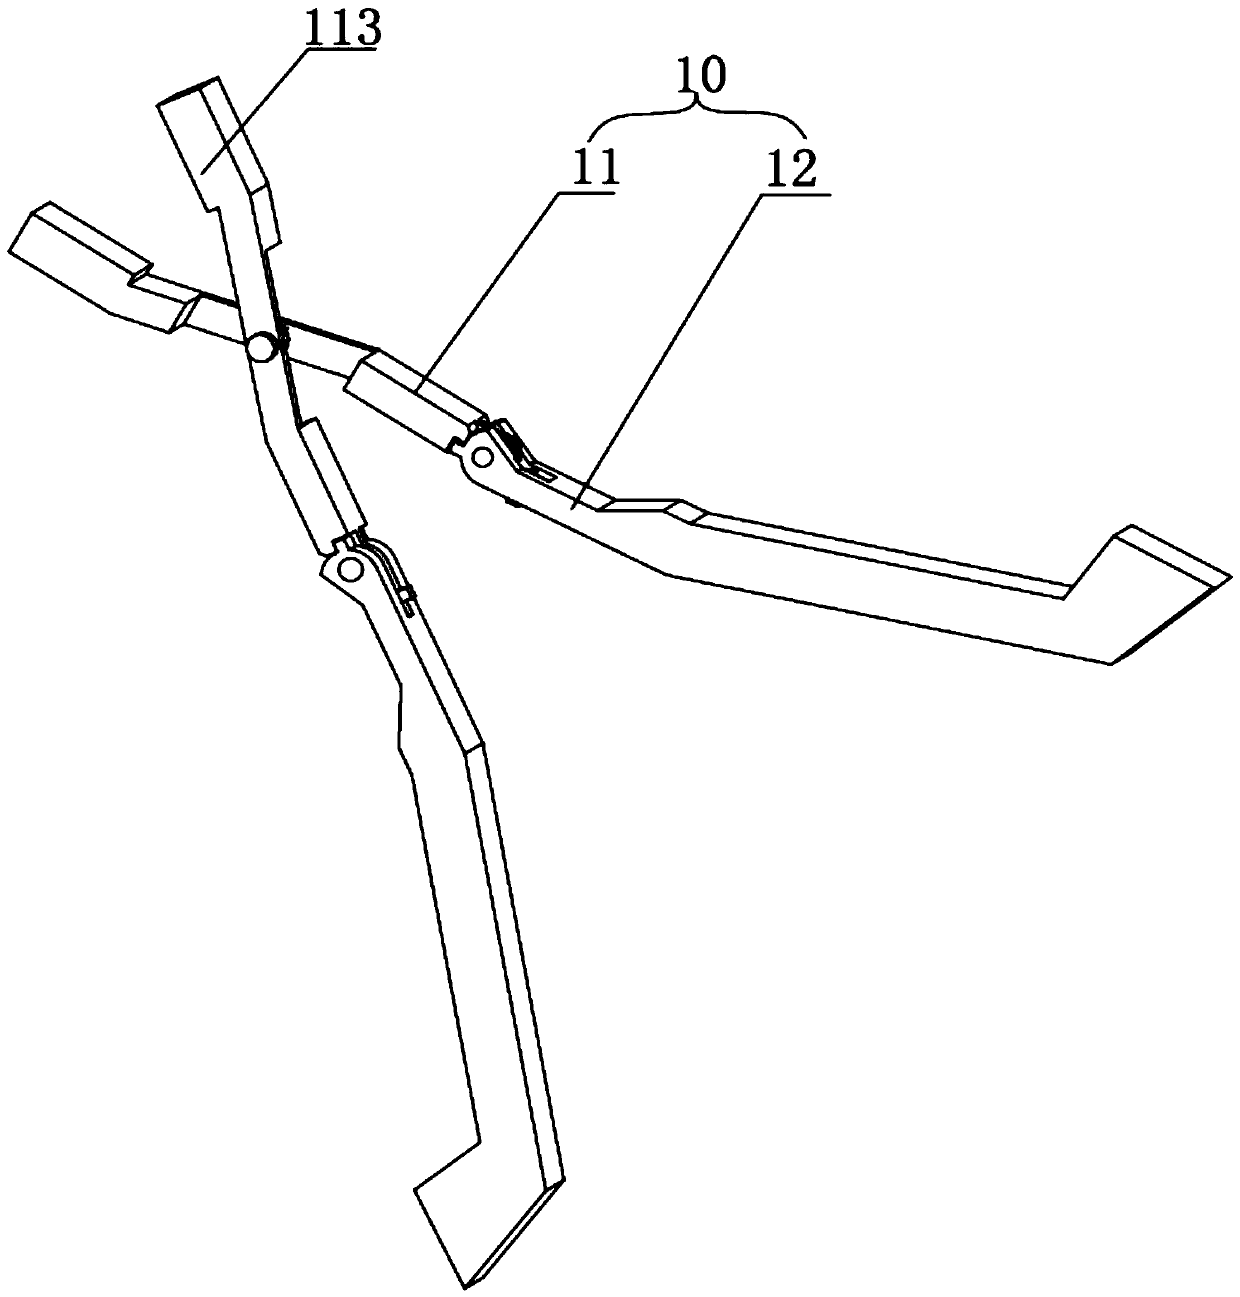 An anti-off clamp